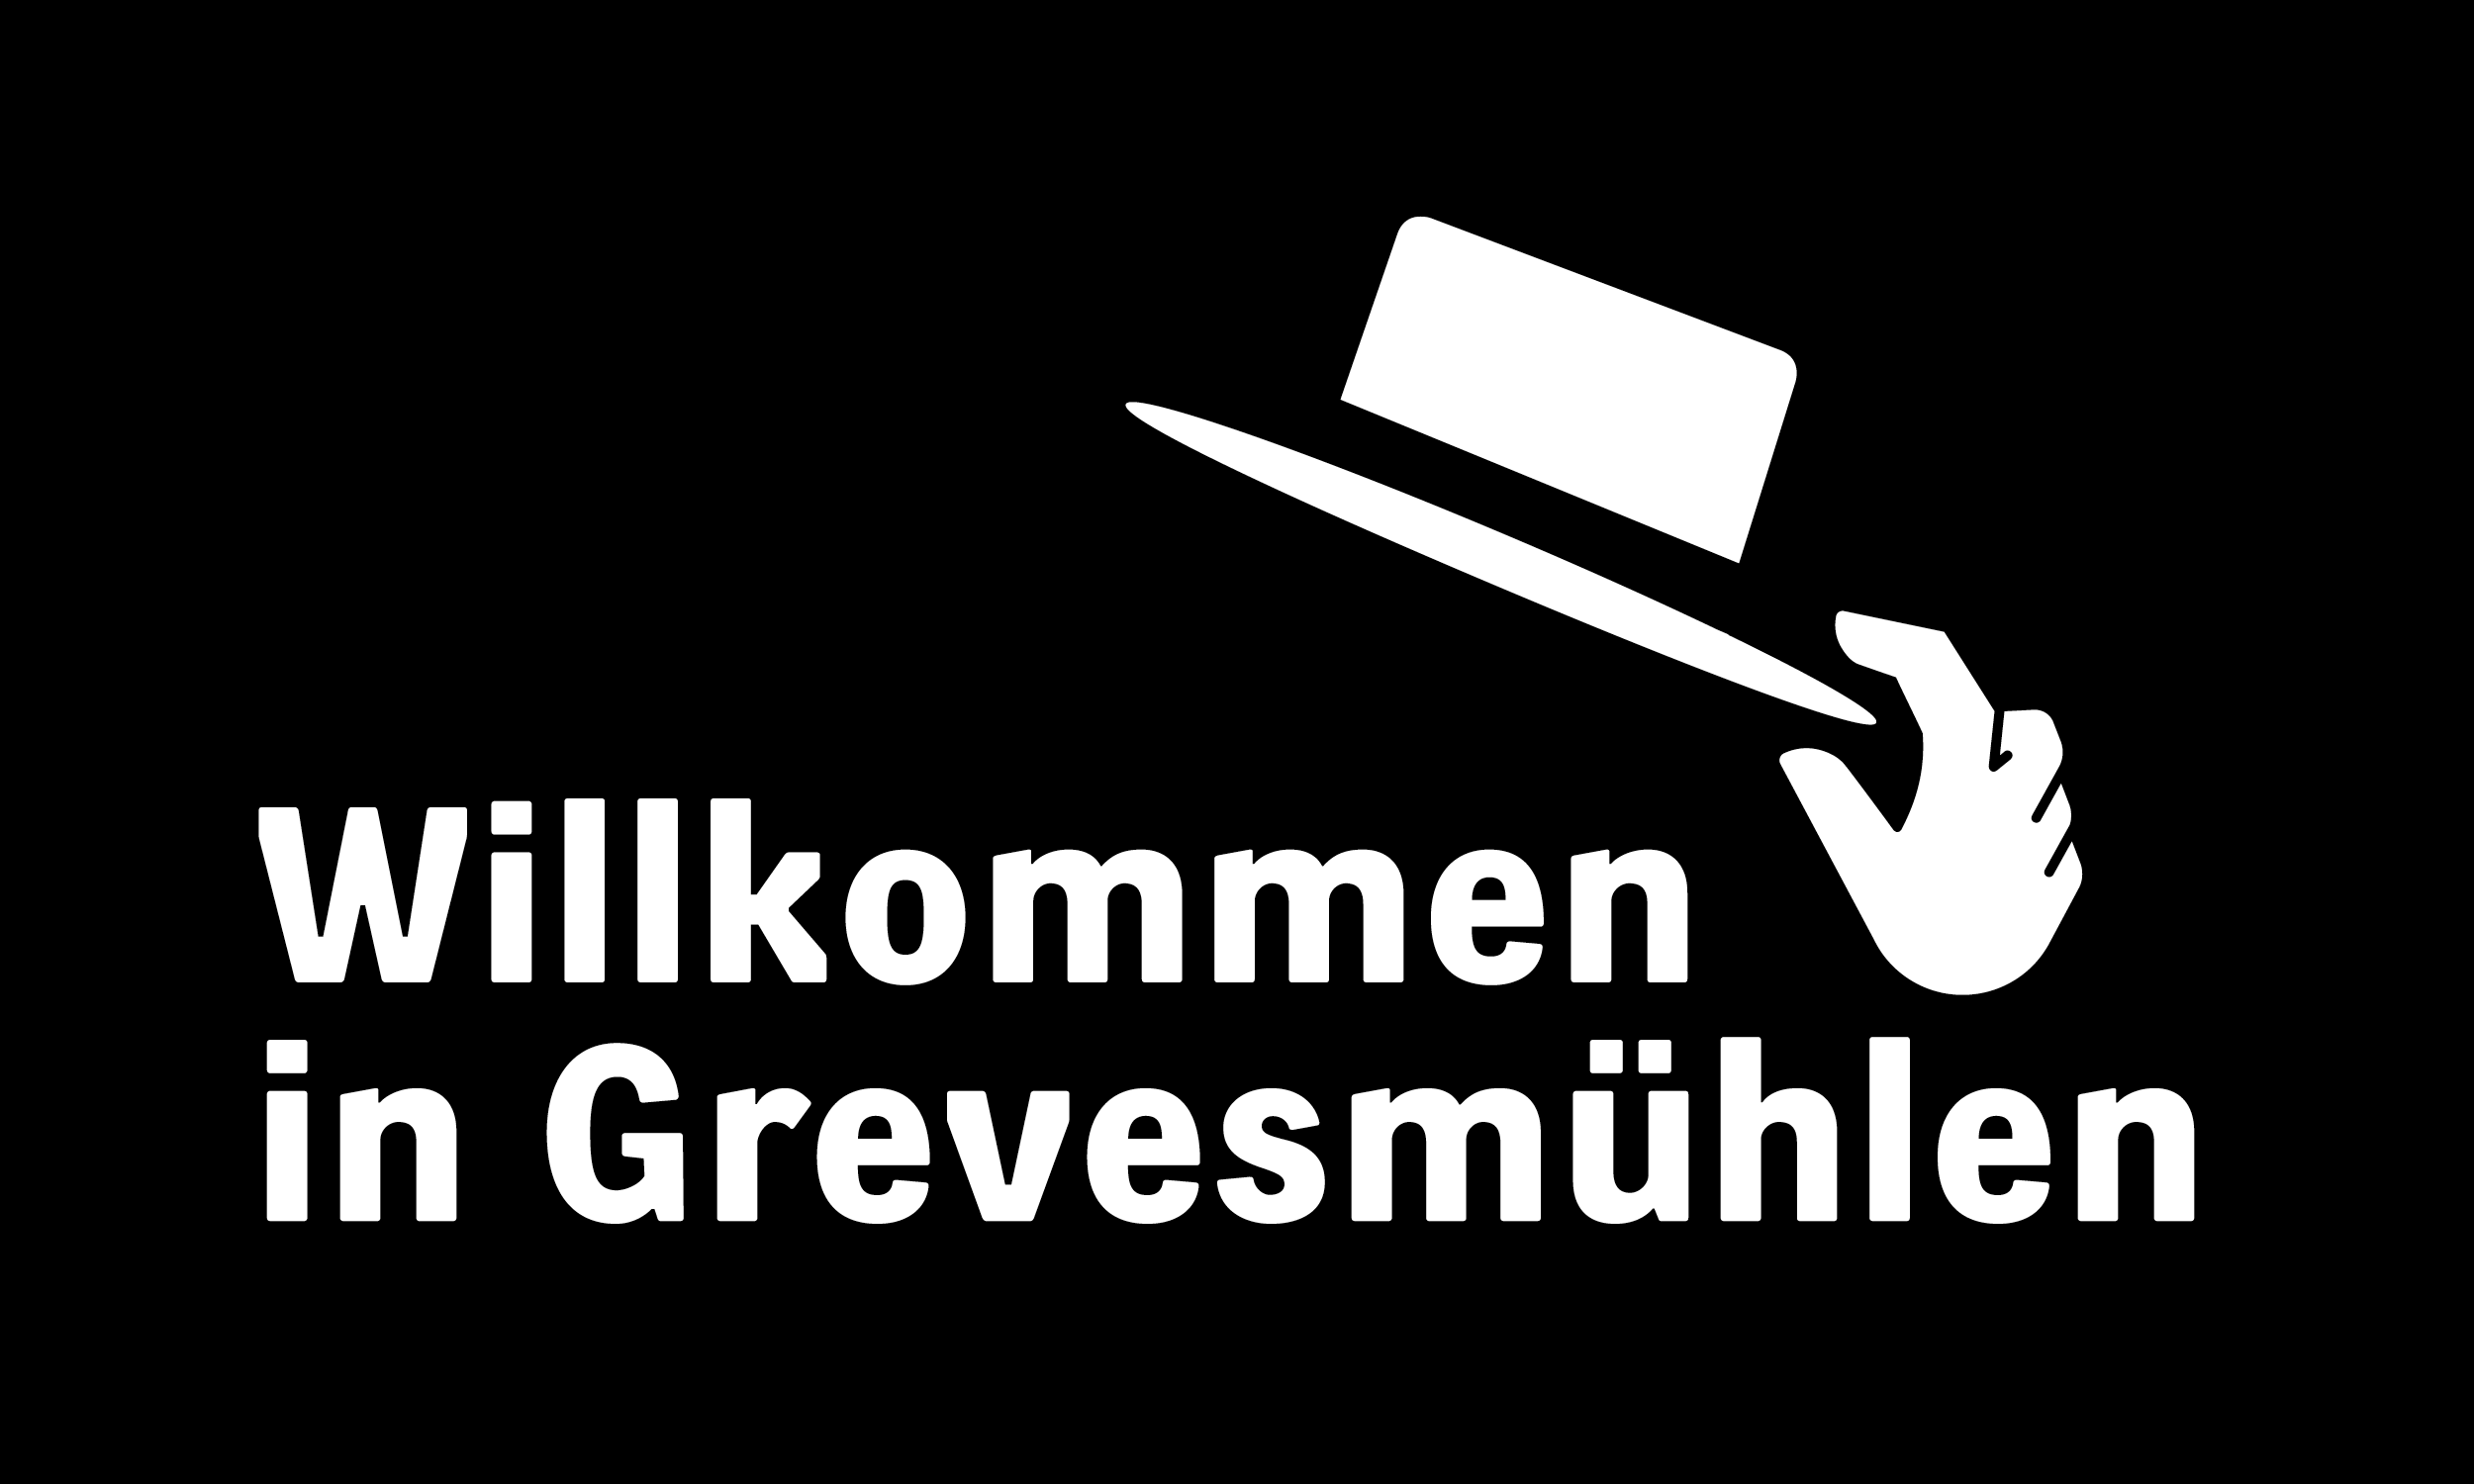 Layout of a black sign. In large letters it says "Welcome to Grevesmühlen". Above it is a hand raising a hat in the old-fashioned way of greeting.